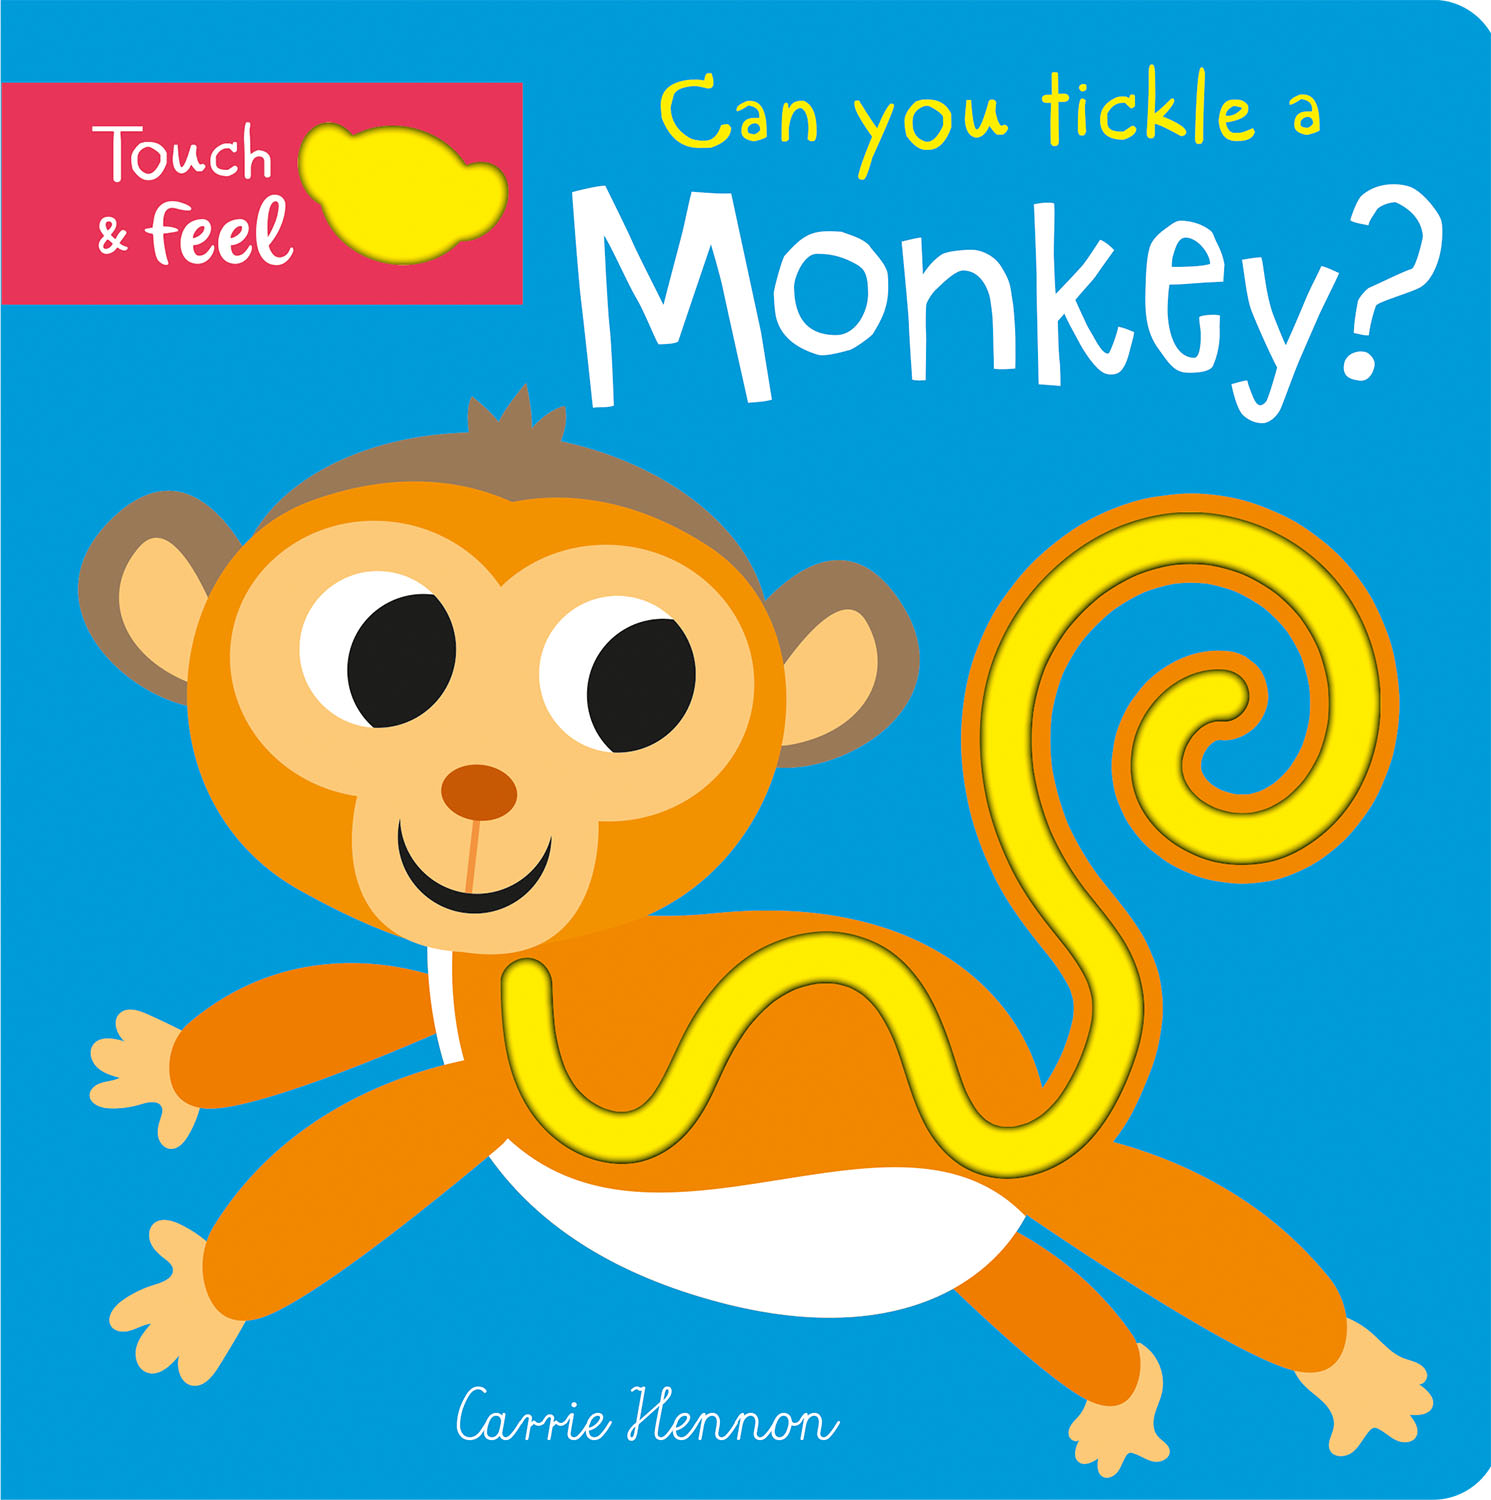 CAN YOU TICKLE A MONKEY?